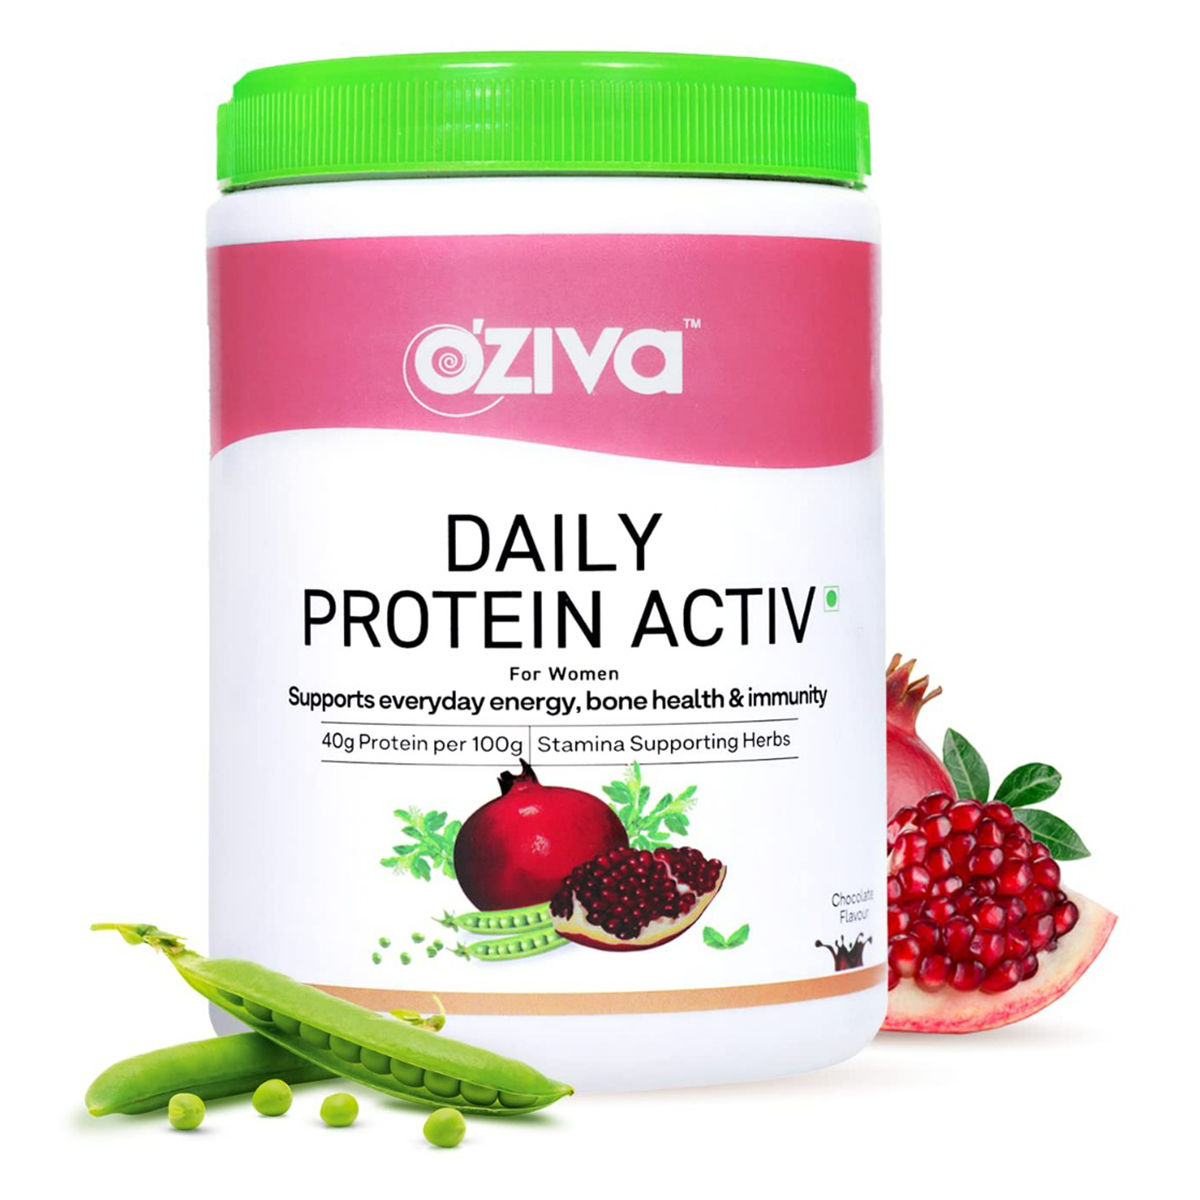 Buy OZiva Daily Protein Activ Chocolate Flavour Powder for Women, 300 gm Online